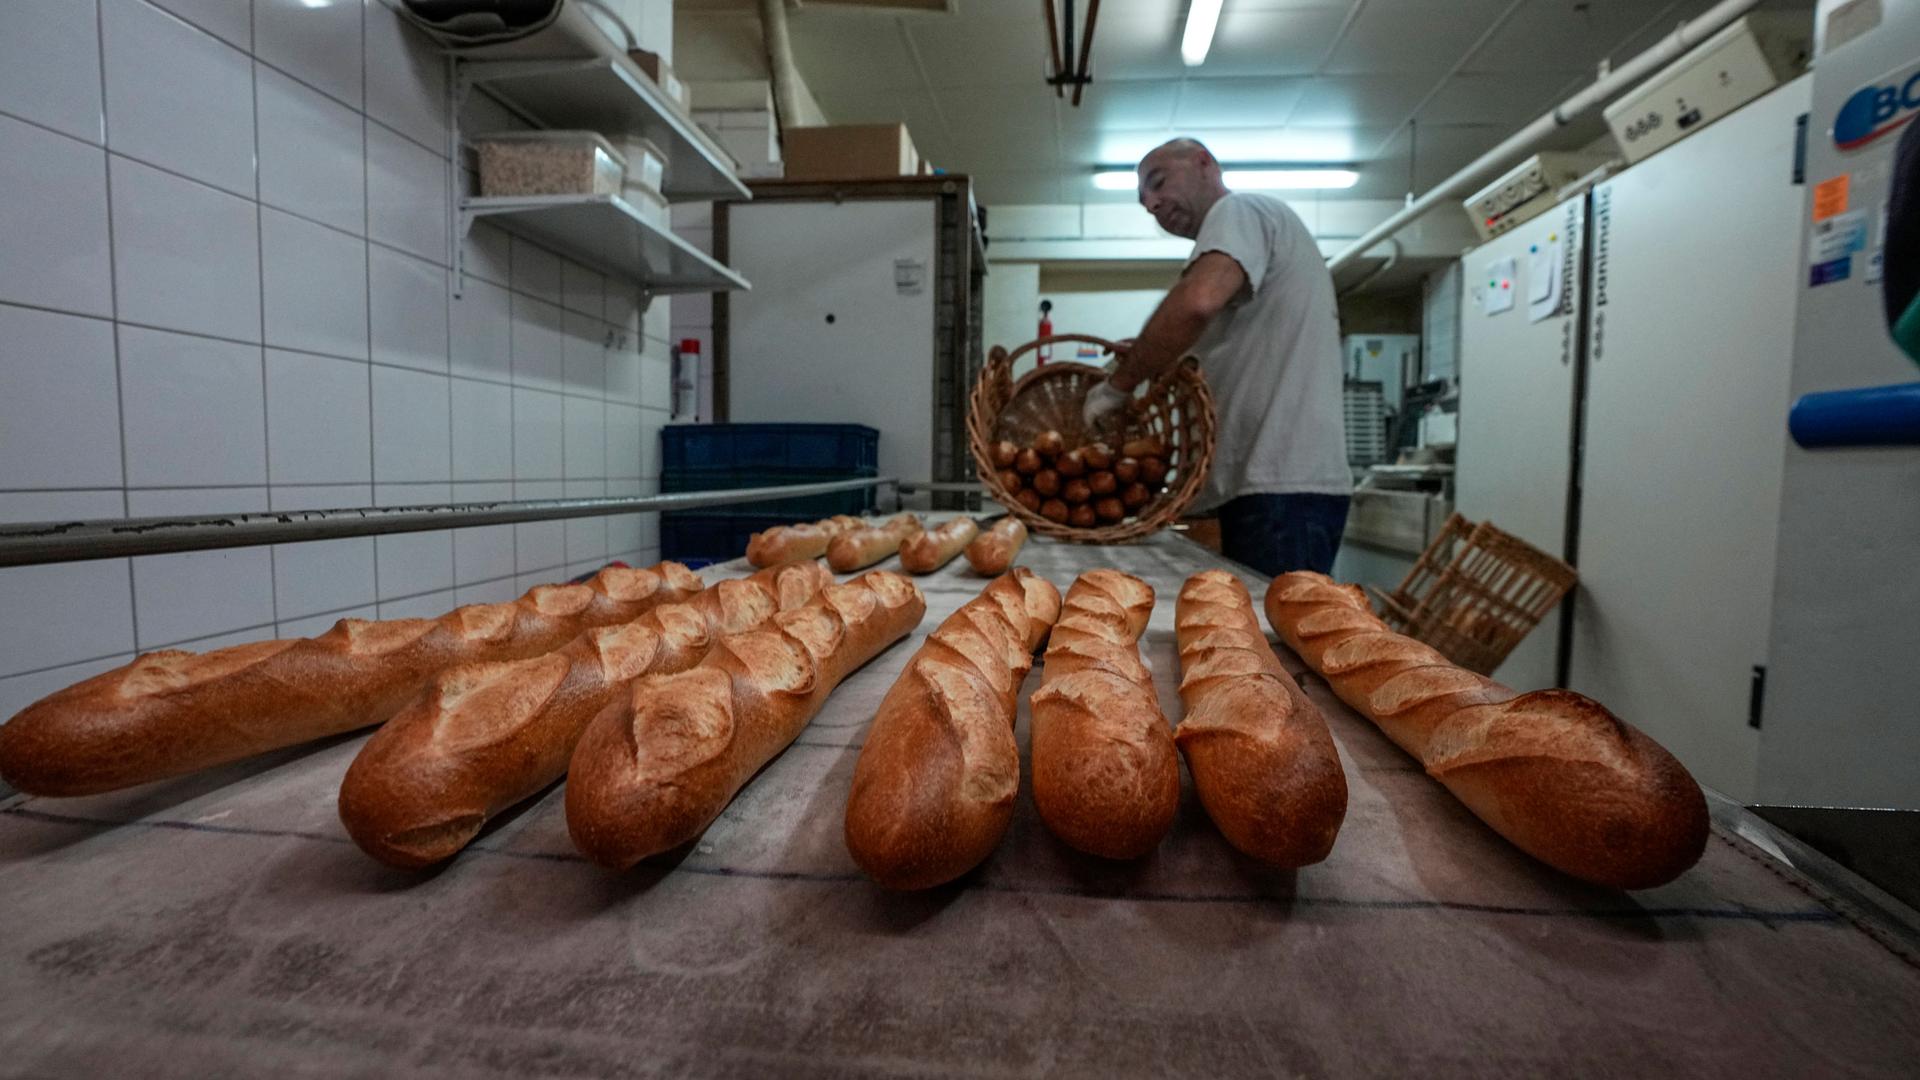 Baker David Buelens puts the baguettes into a basket at a bakery, in Versailles, west of Paris, Tuesday, Nov. 29, 2022. 